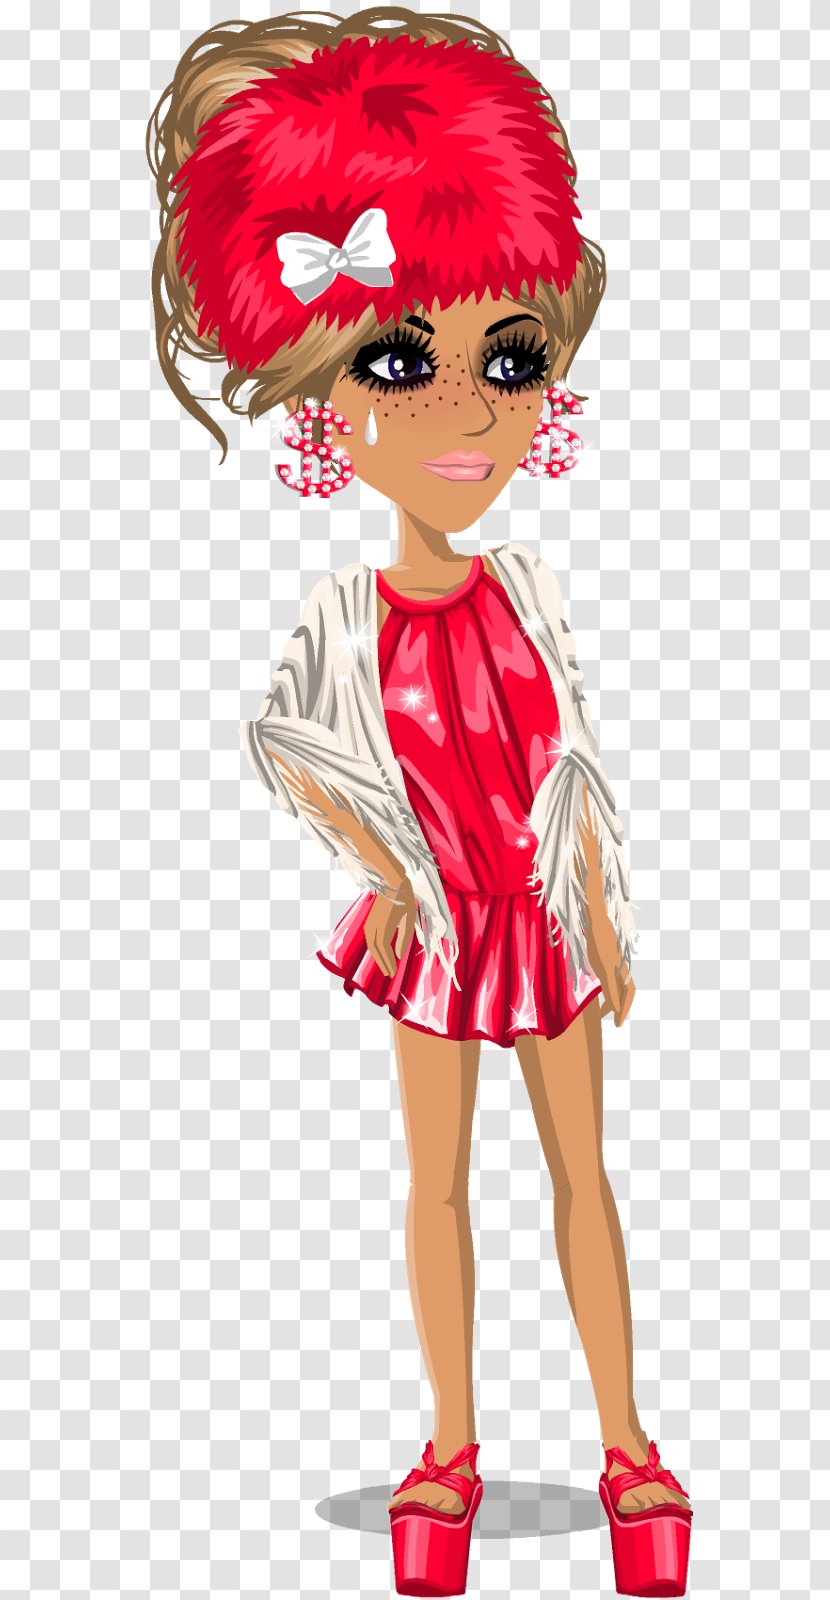 MovieStarPlanet Drawing Character Art - Flower - Shopping Spree Transparent PNG